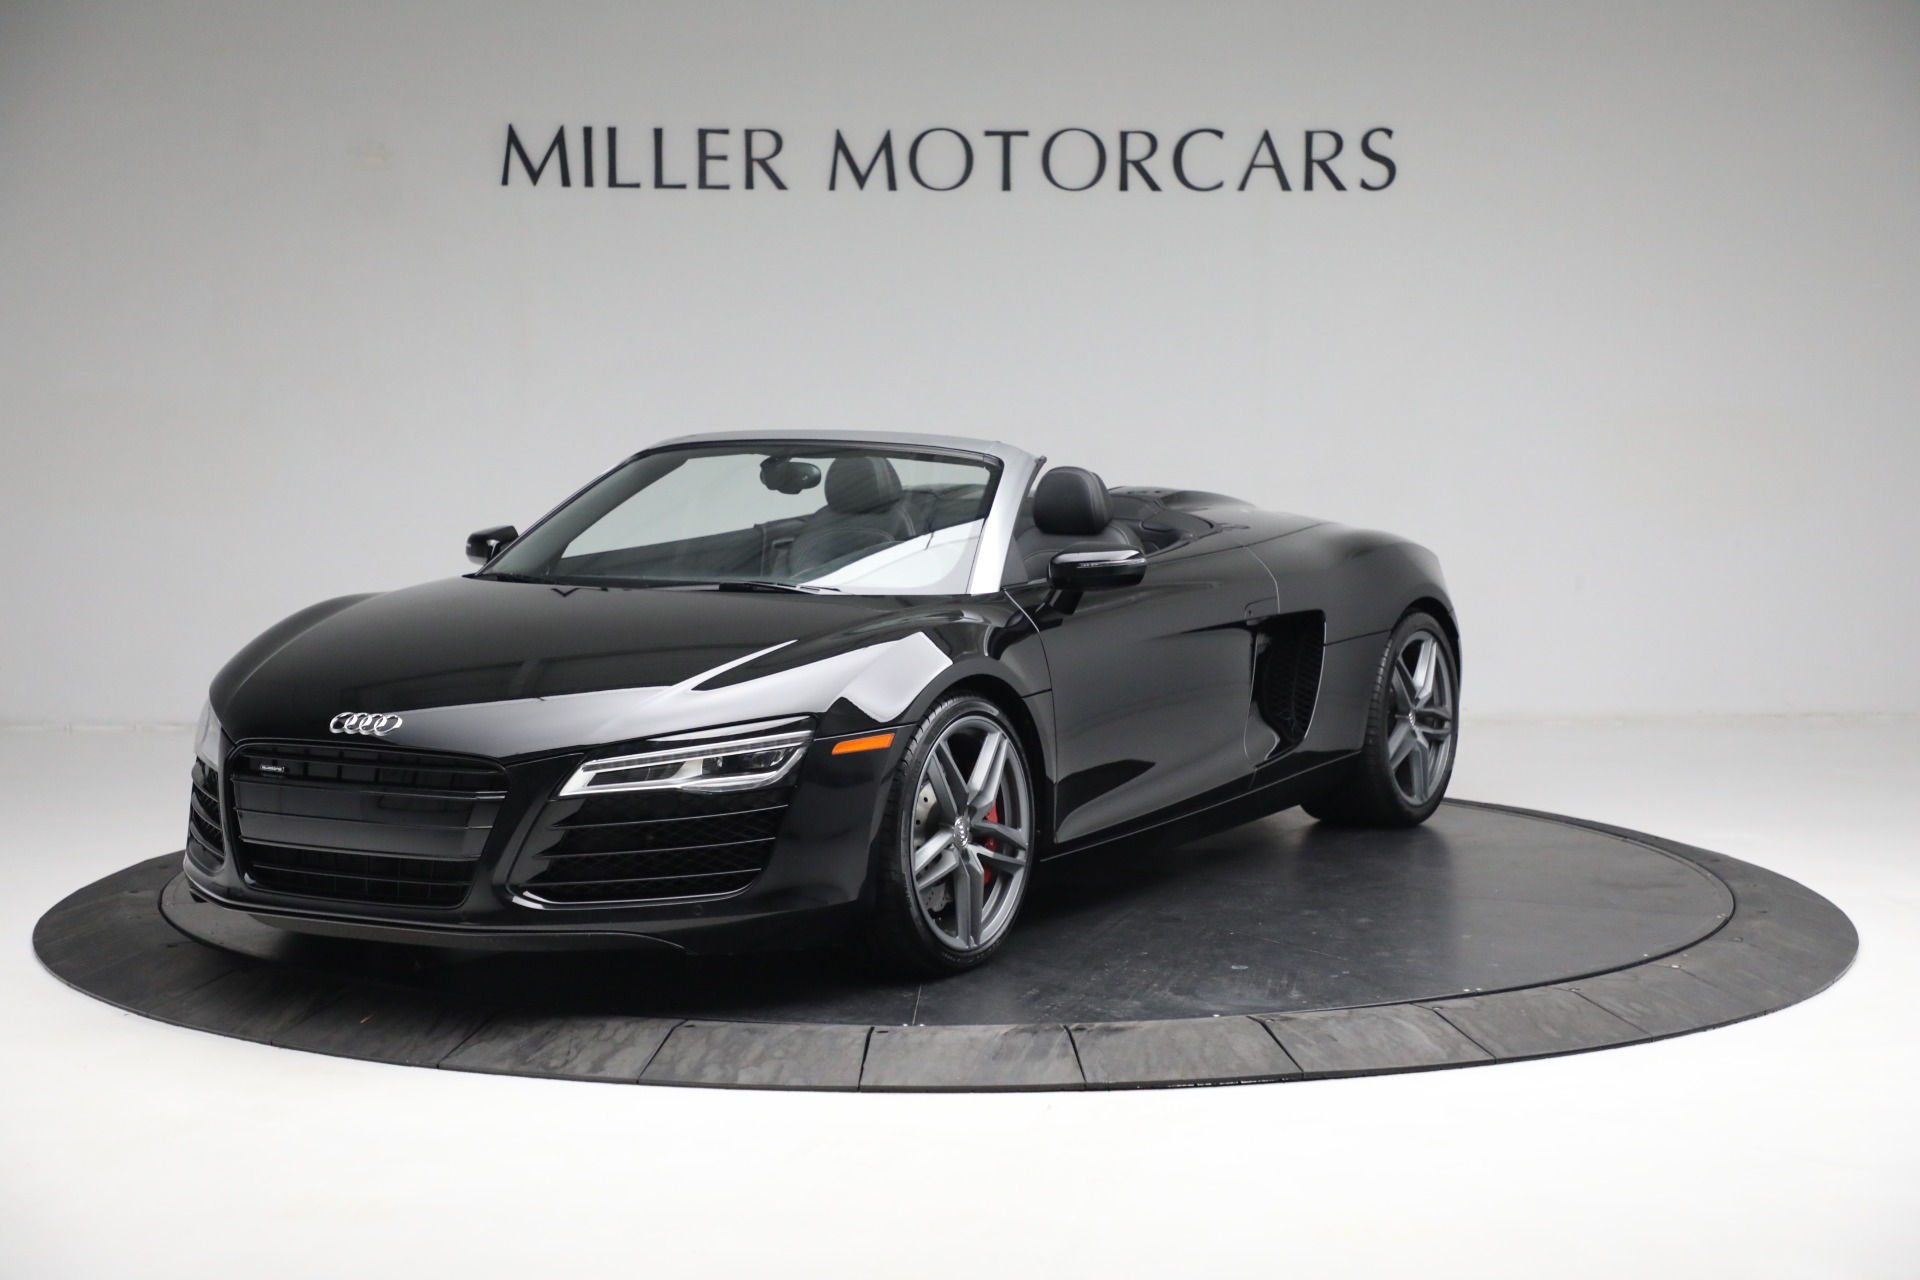 Used 2015 Audi R8 4.2 quattro Spyder for sale $109,900 at Aston Martin of Greenwich in Greenwich CT 06830 1